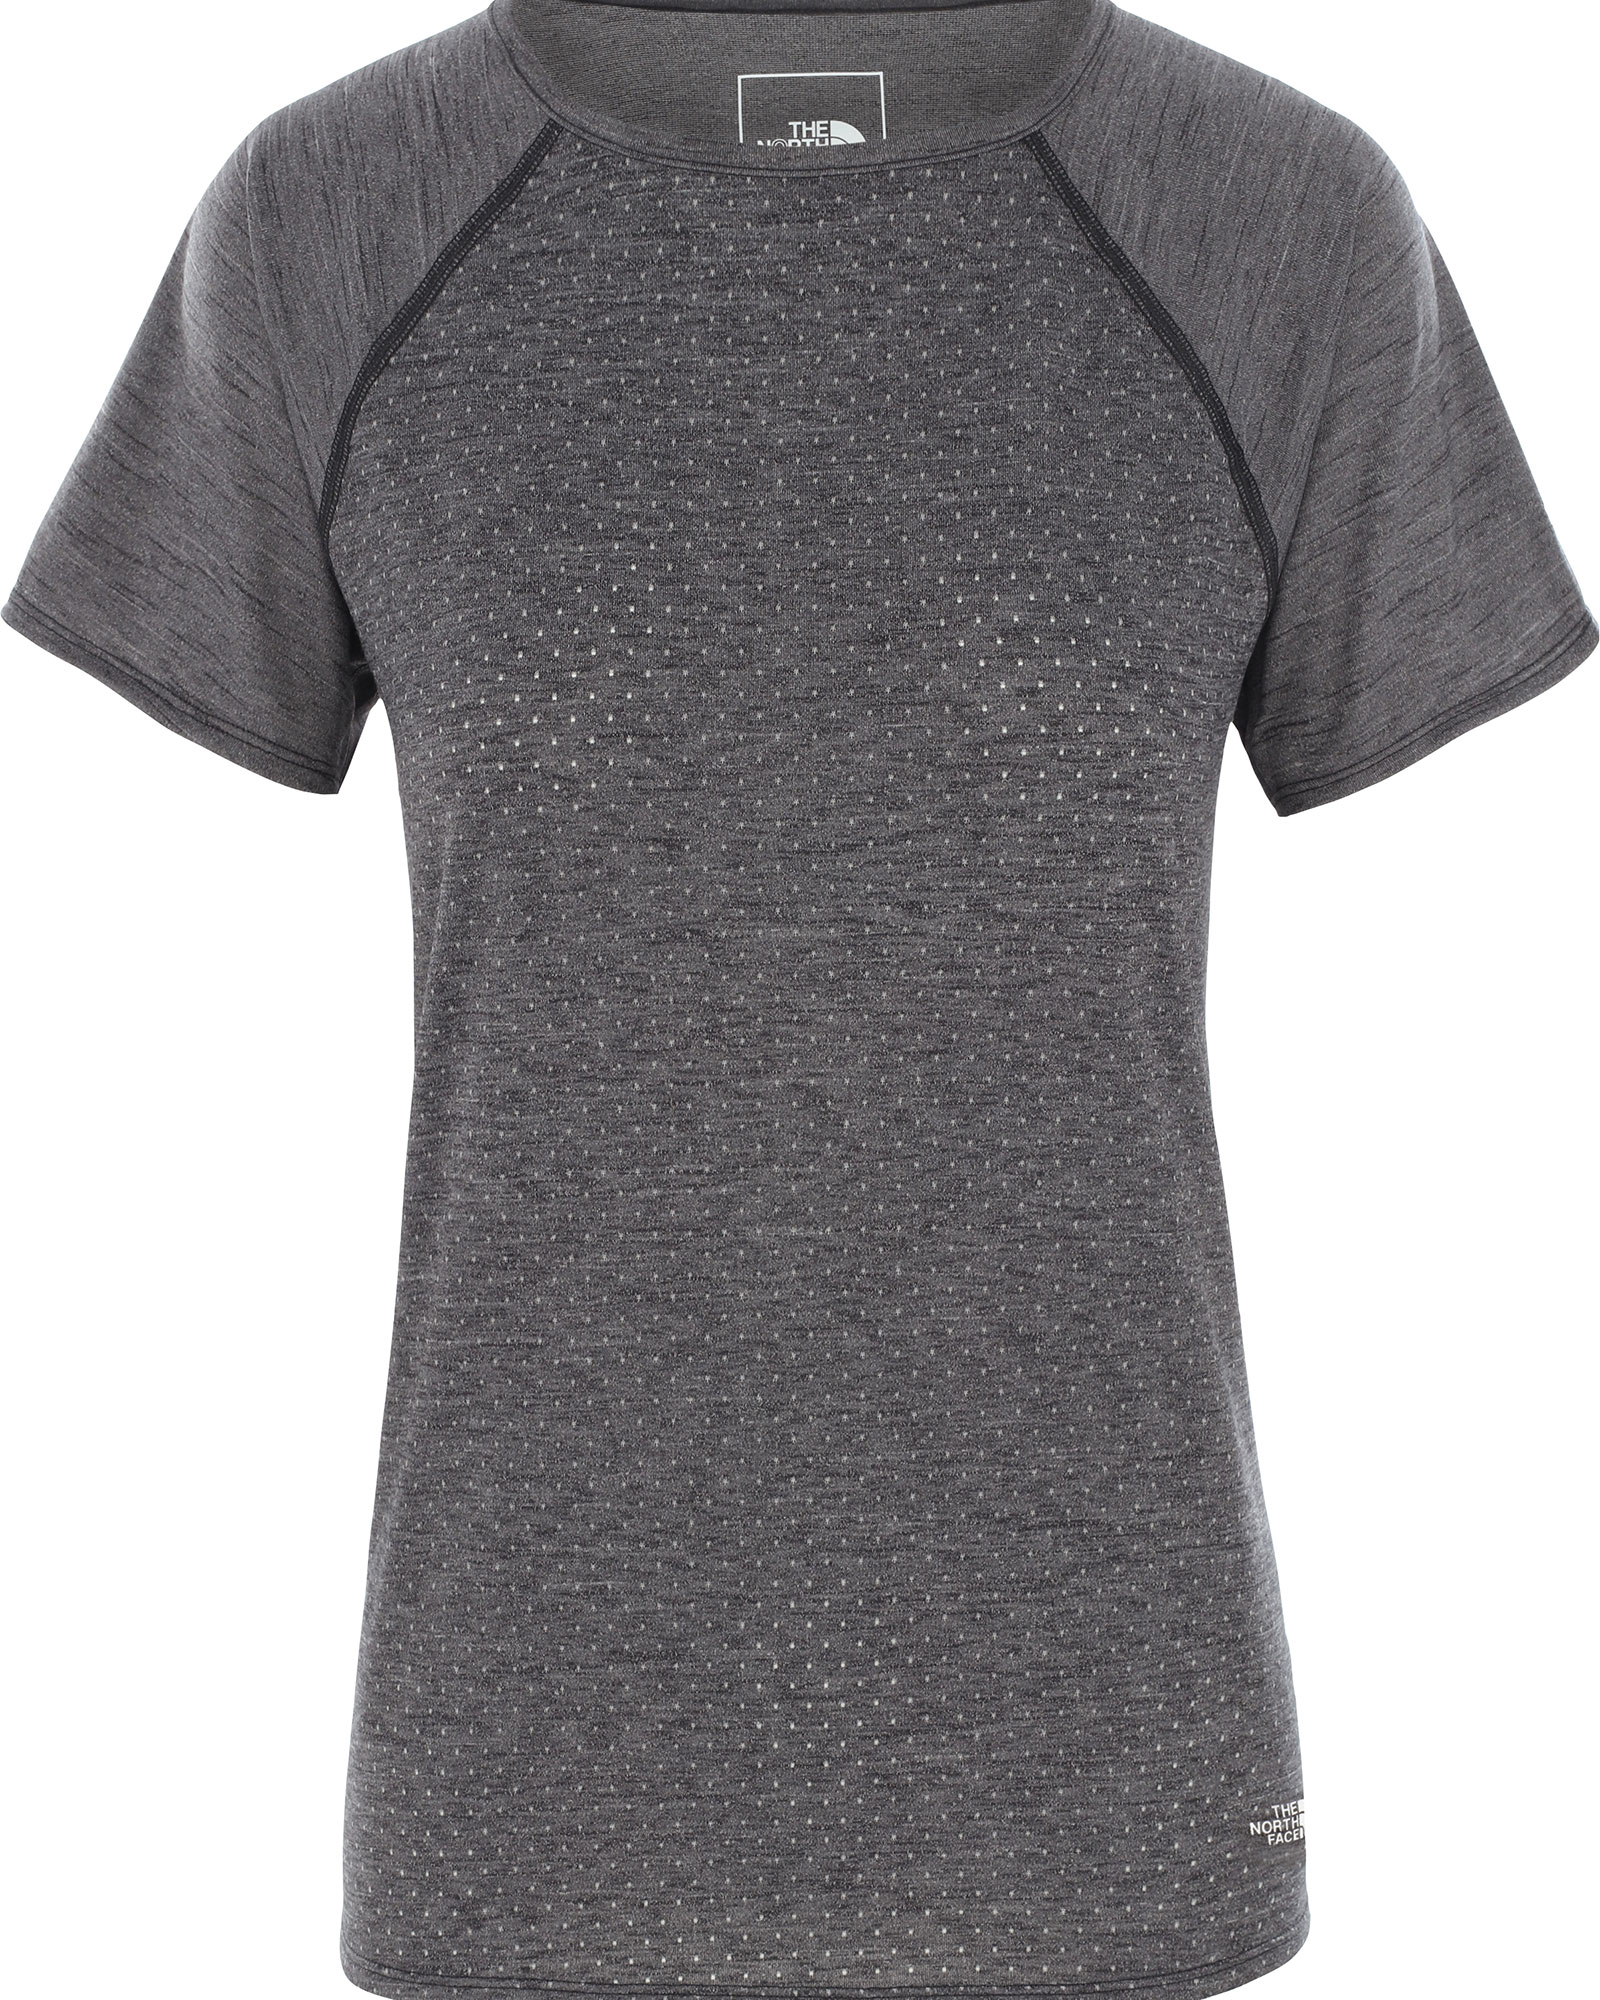 The North Face Active Trail Jacquard Women’s T Shirt - TNF Dark Grey Heather S